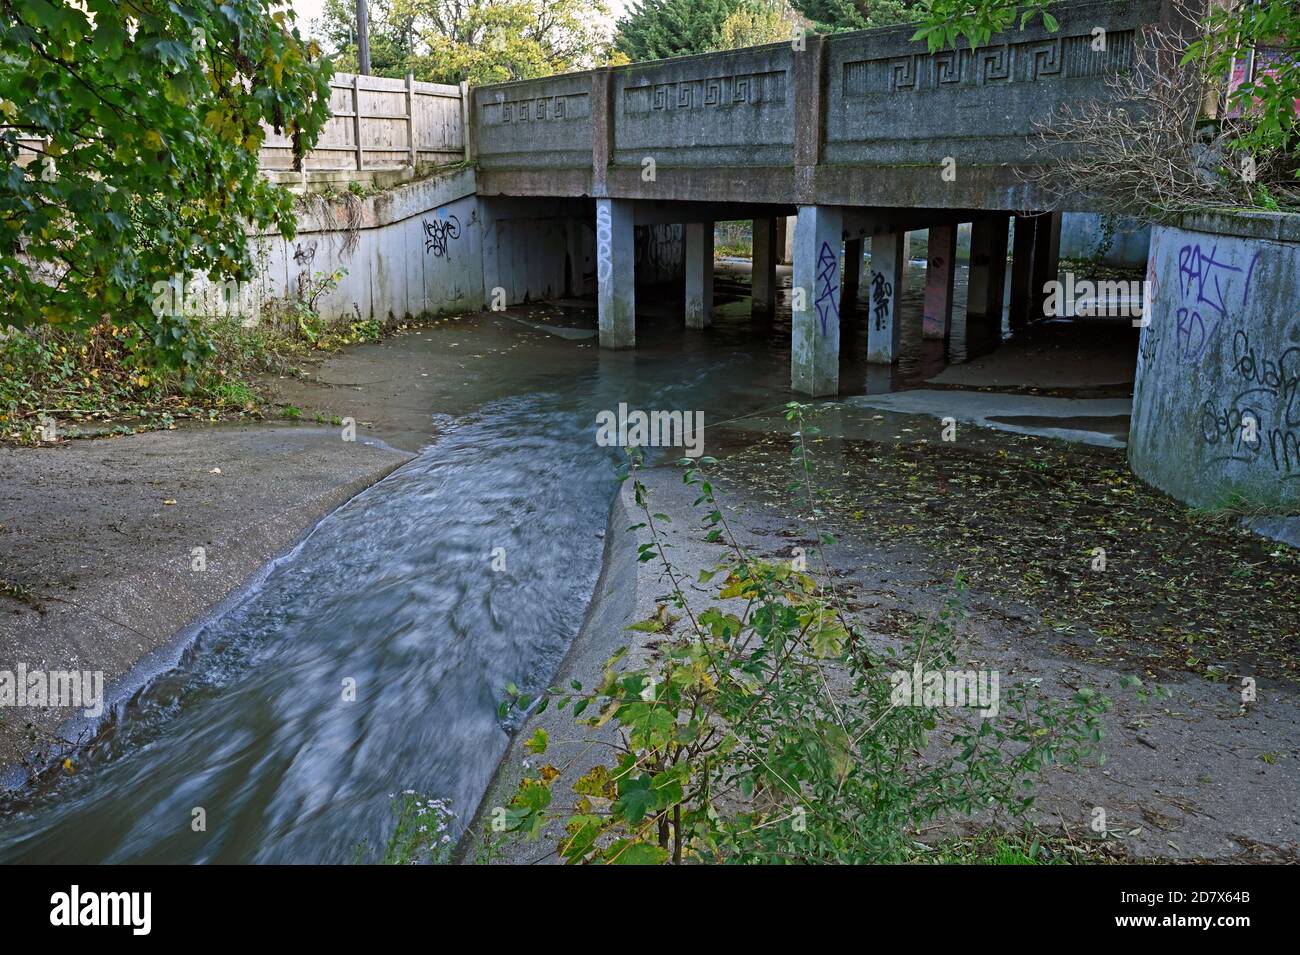 The River Crouch flows through the concrete channel under the London Road Bridge, Wickford, Essex. UK Stock Photo